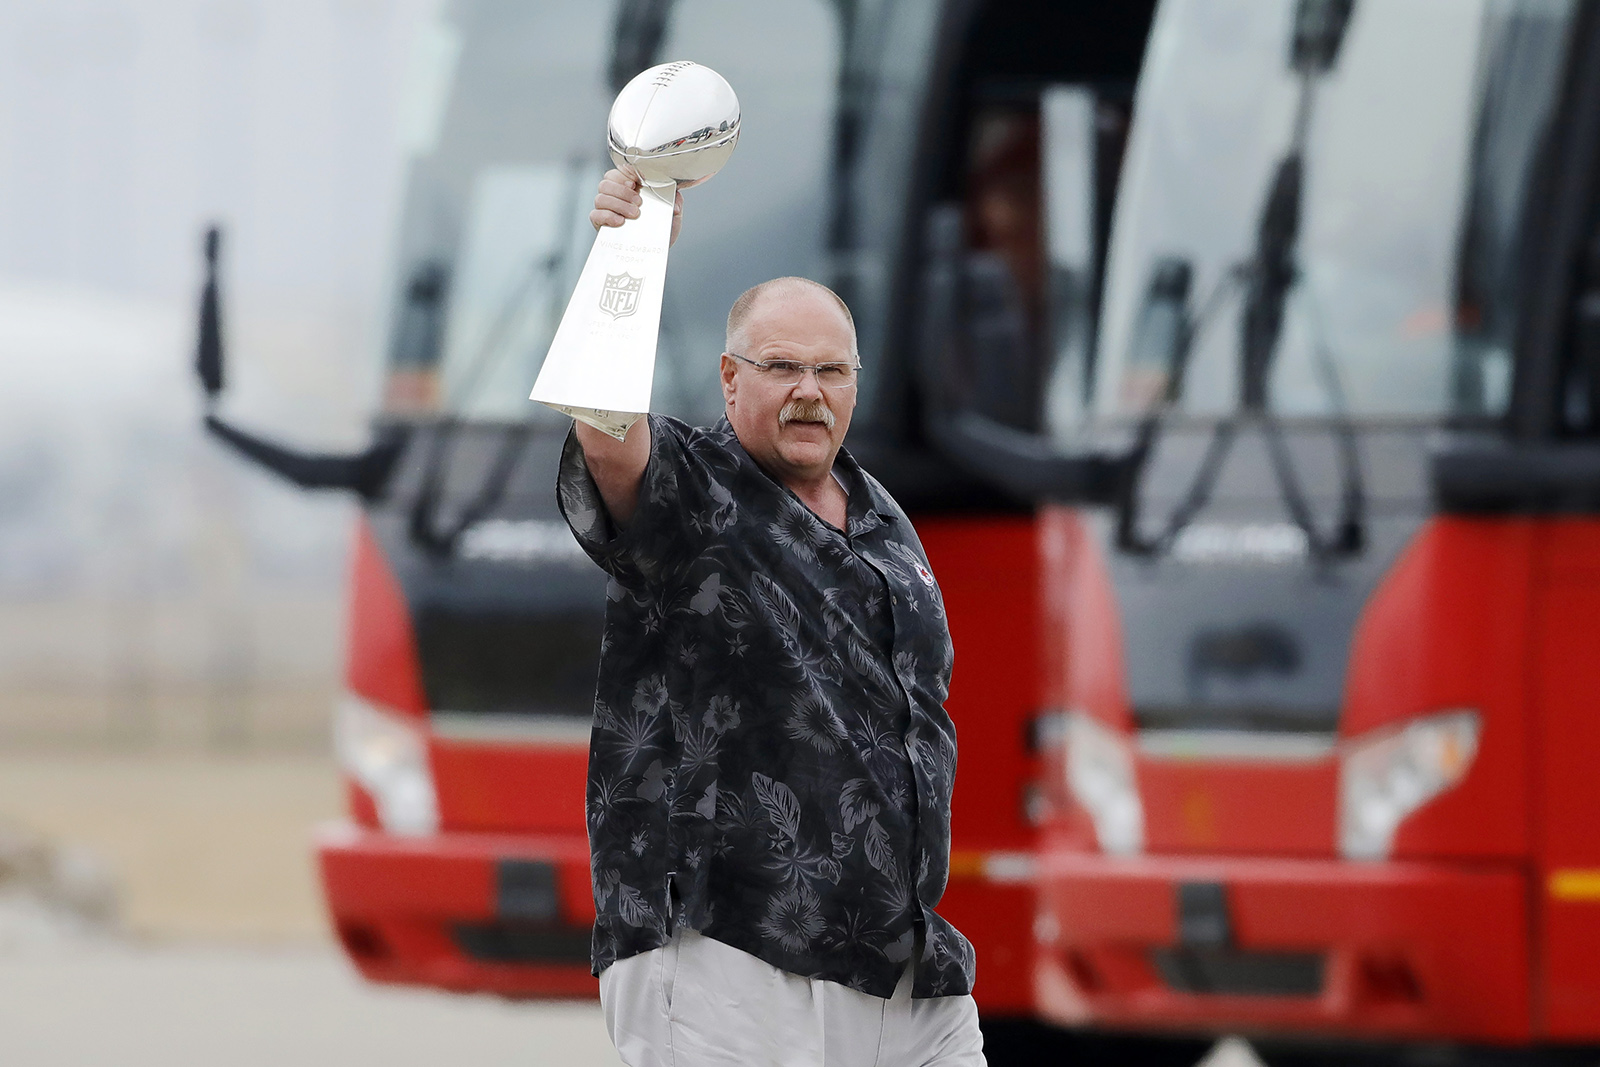 Kansas City Chiefs head coach Andy Reid holds up the Vince Lombardi Trophy as his team returns home a day after winning the NFL Super Bowl 54 football game, Monday, Feb. 3, 2020, in Kansas City, Mo. The Chiefs defeated the San Francisco 49ers 31-20, to win their first championship in 50 years. (AP Photo/Colin E. Braley)